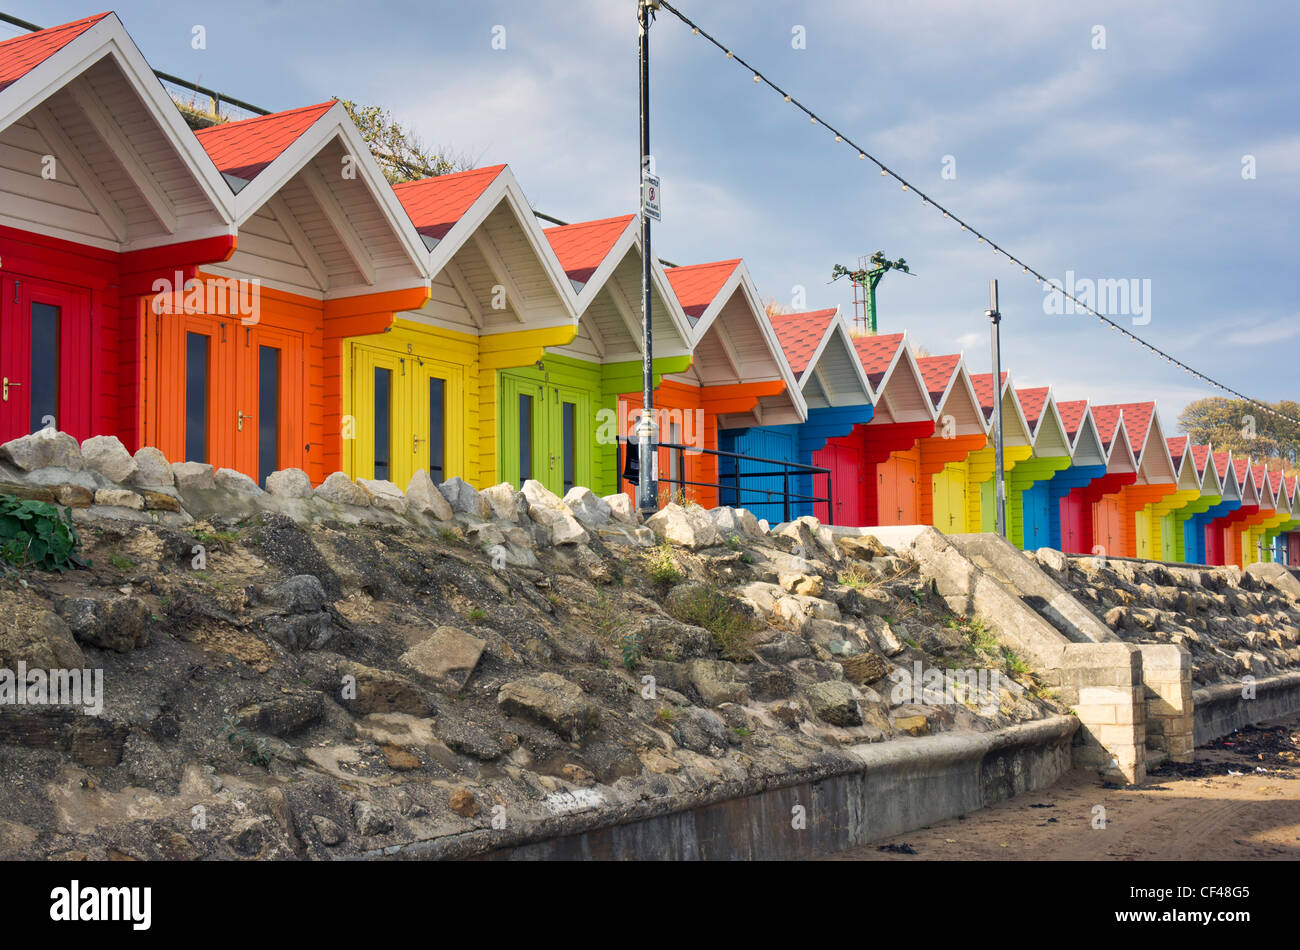 Traditional colourful beach chalets located on the North Bay promenade. Stock Photo